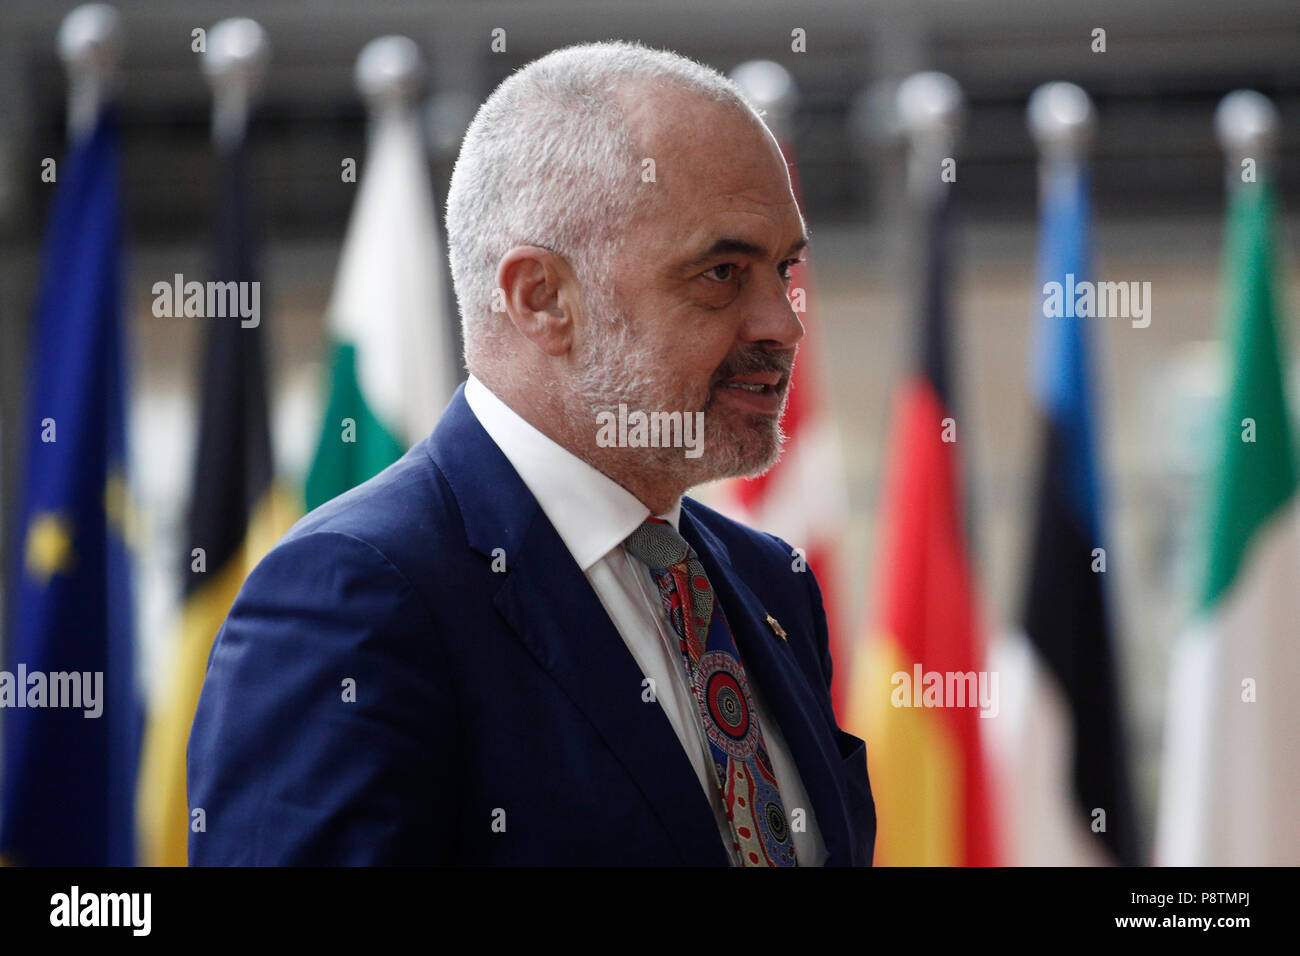 Brussels, Belgium. 13th July, 2018. Donald Tusk, the President of the European Council welcomes the Prime Minister of Albania Edi Rama at European Council headquarters. Alexandros Michailidis/Alamy Live News Stock Photo